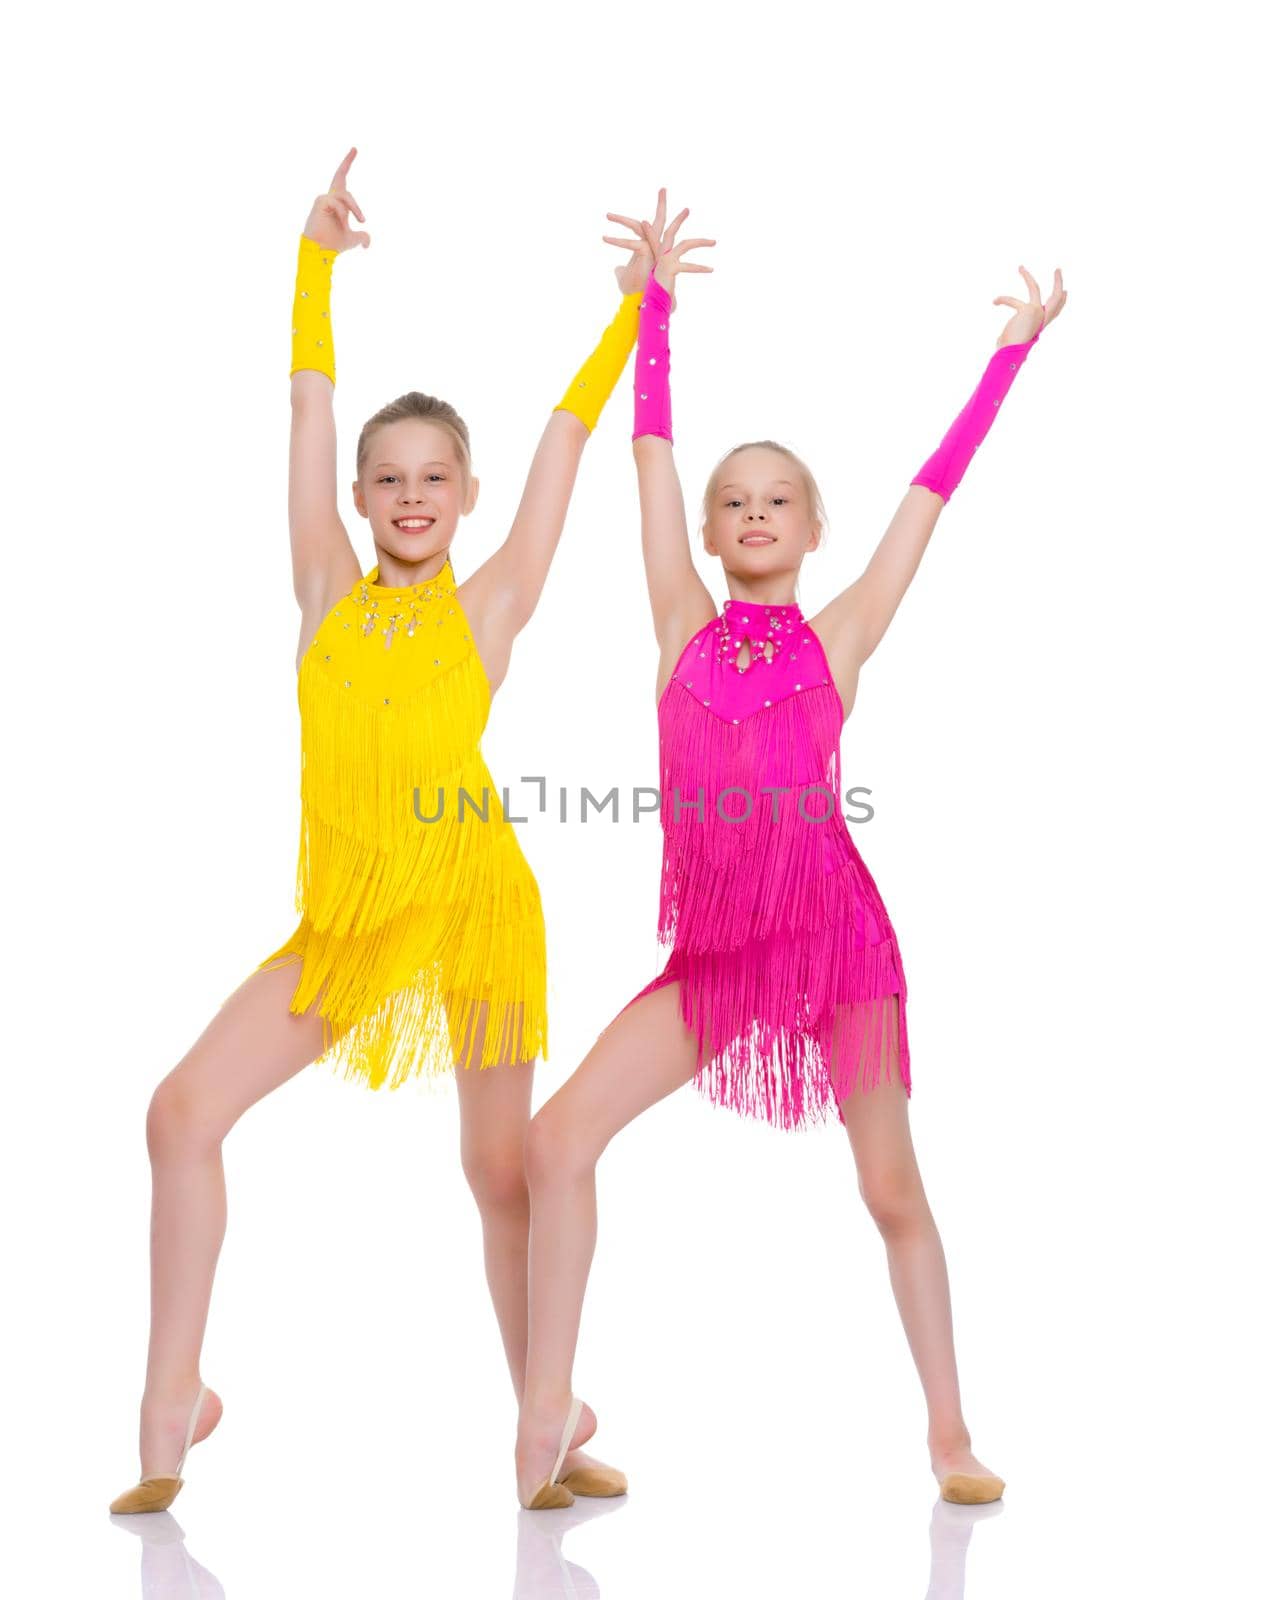 Girls gymnasts perform exercises. The concept of strength, health and sport. Isolated on white background.